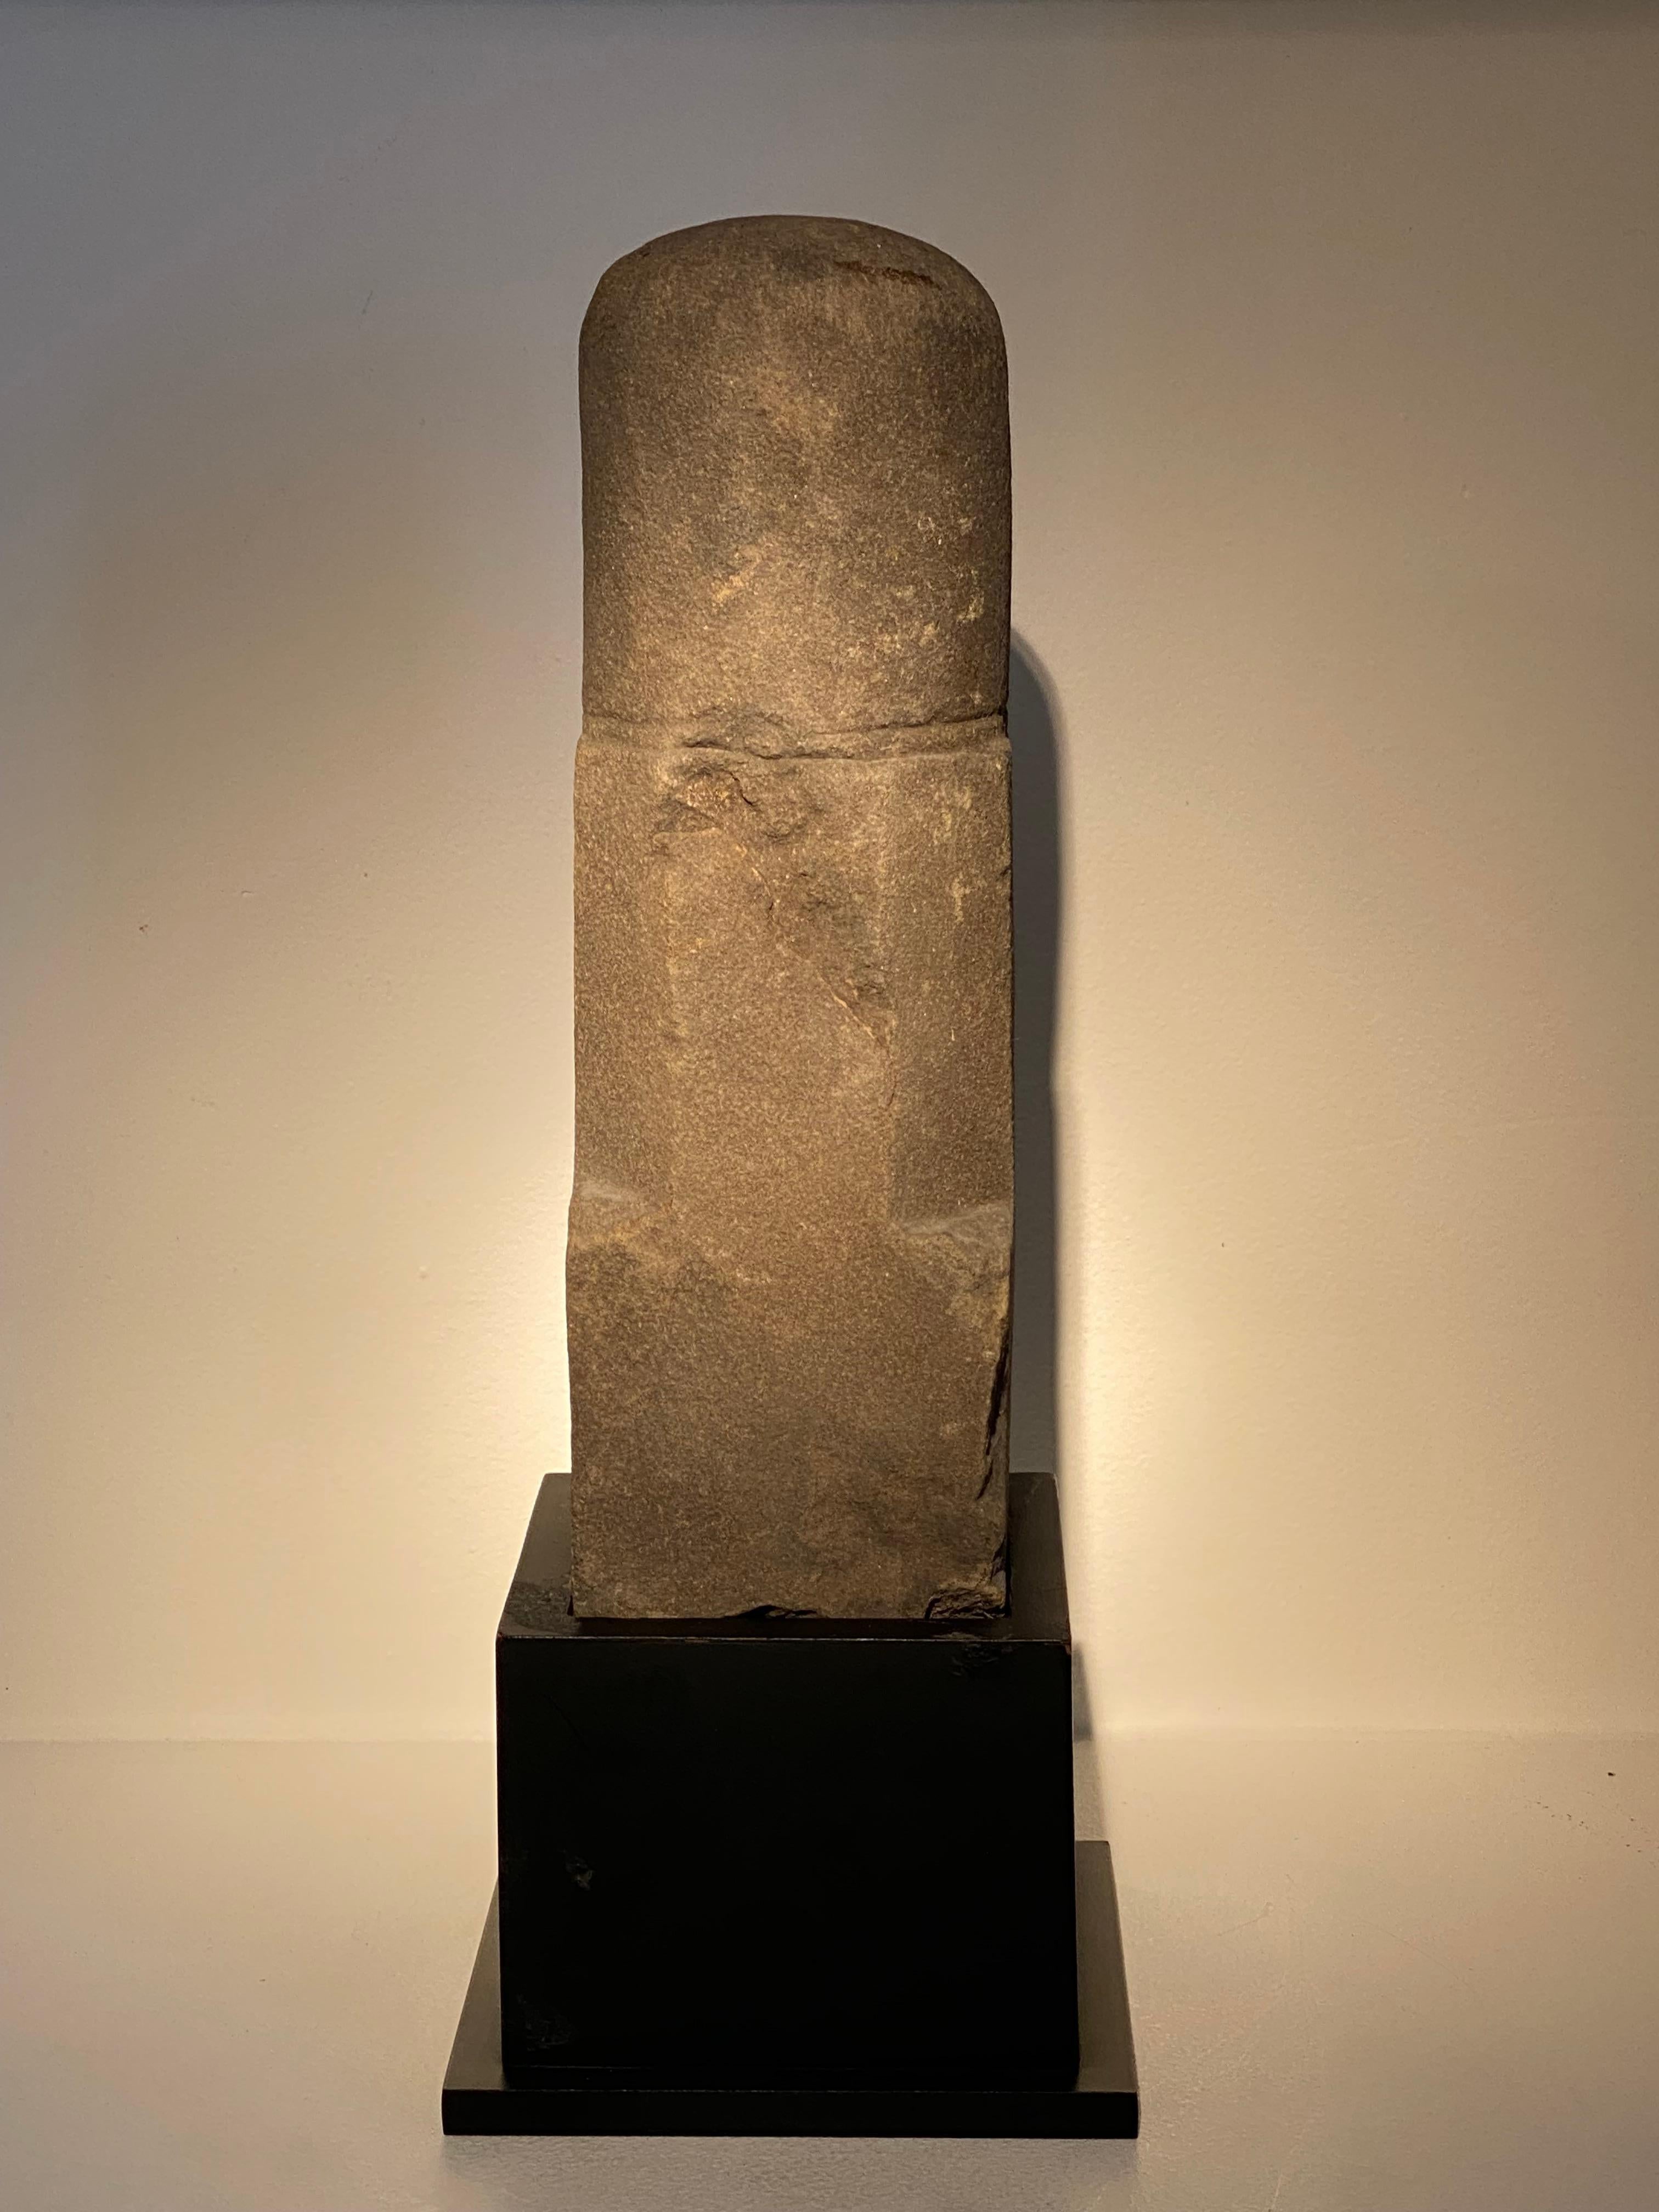 Beautiful antique Sandstone Shiva Lingam from South-East-Asia,
Khmer Period, 12-13 th Century, Thailand-Cambodia Region,
this Hindu magical stone was used as a fertility and well-being object giving
power and energy,
the 3 parts representing the 3